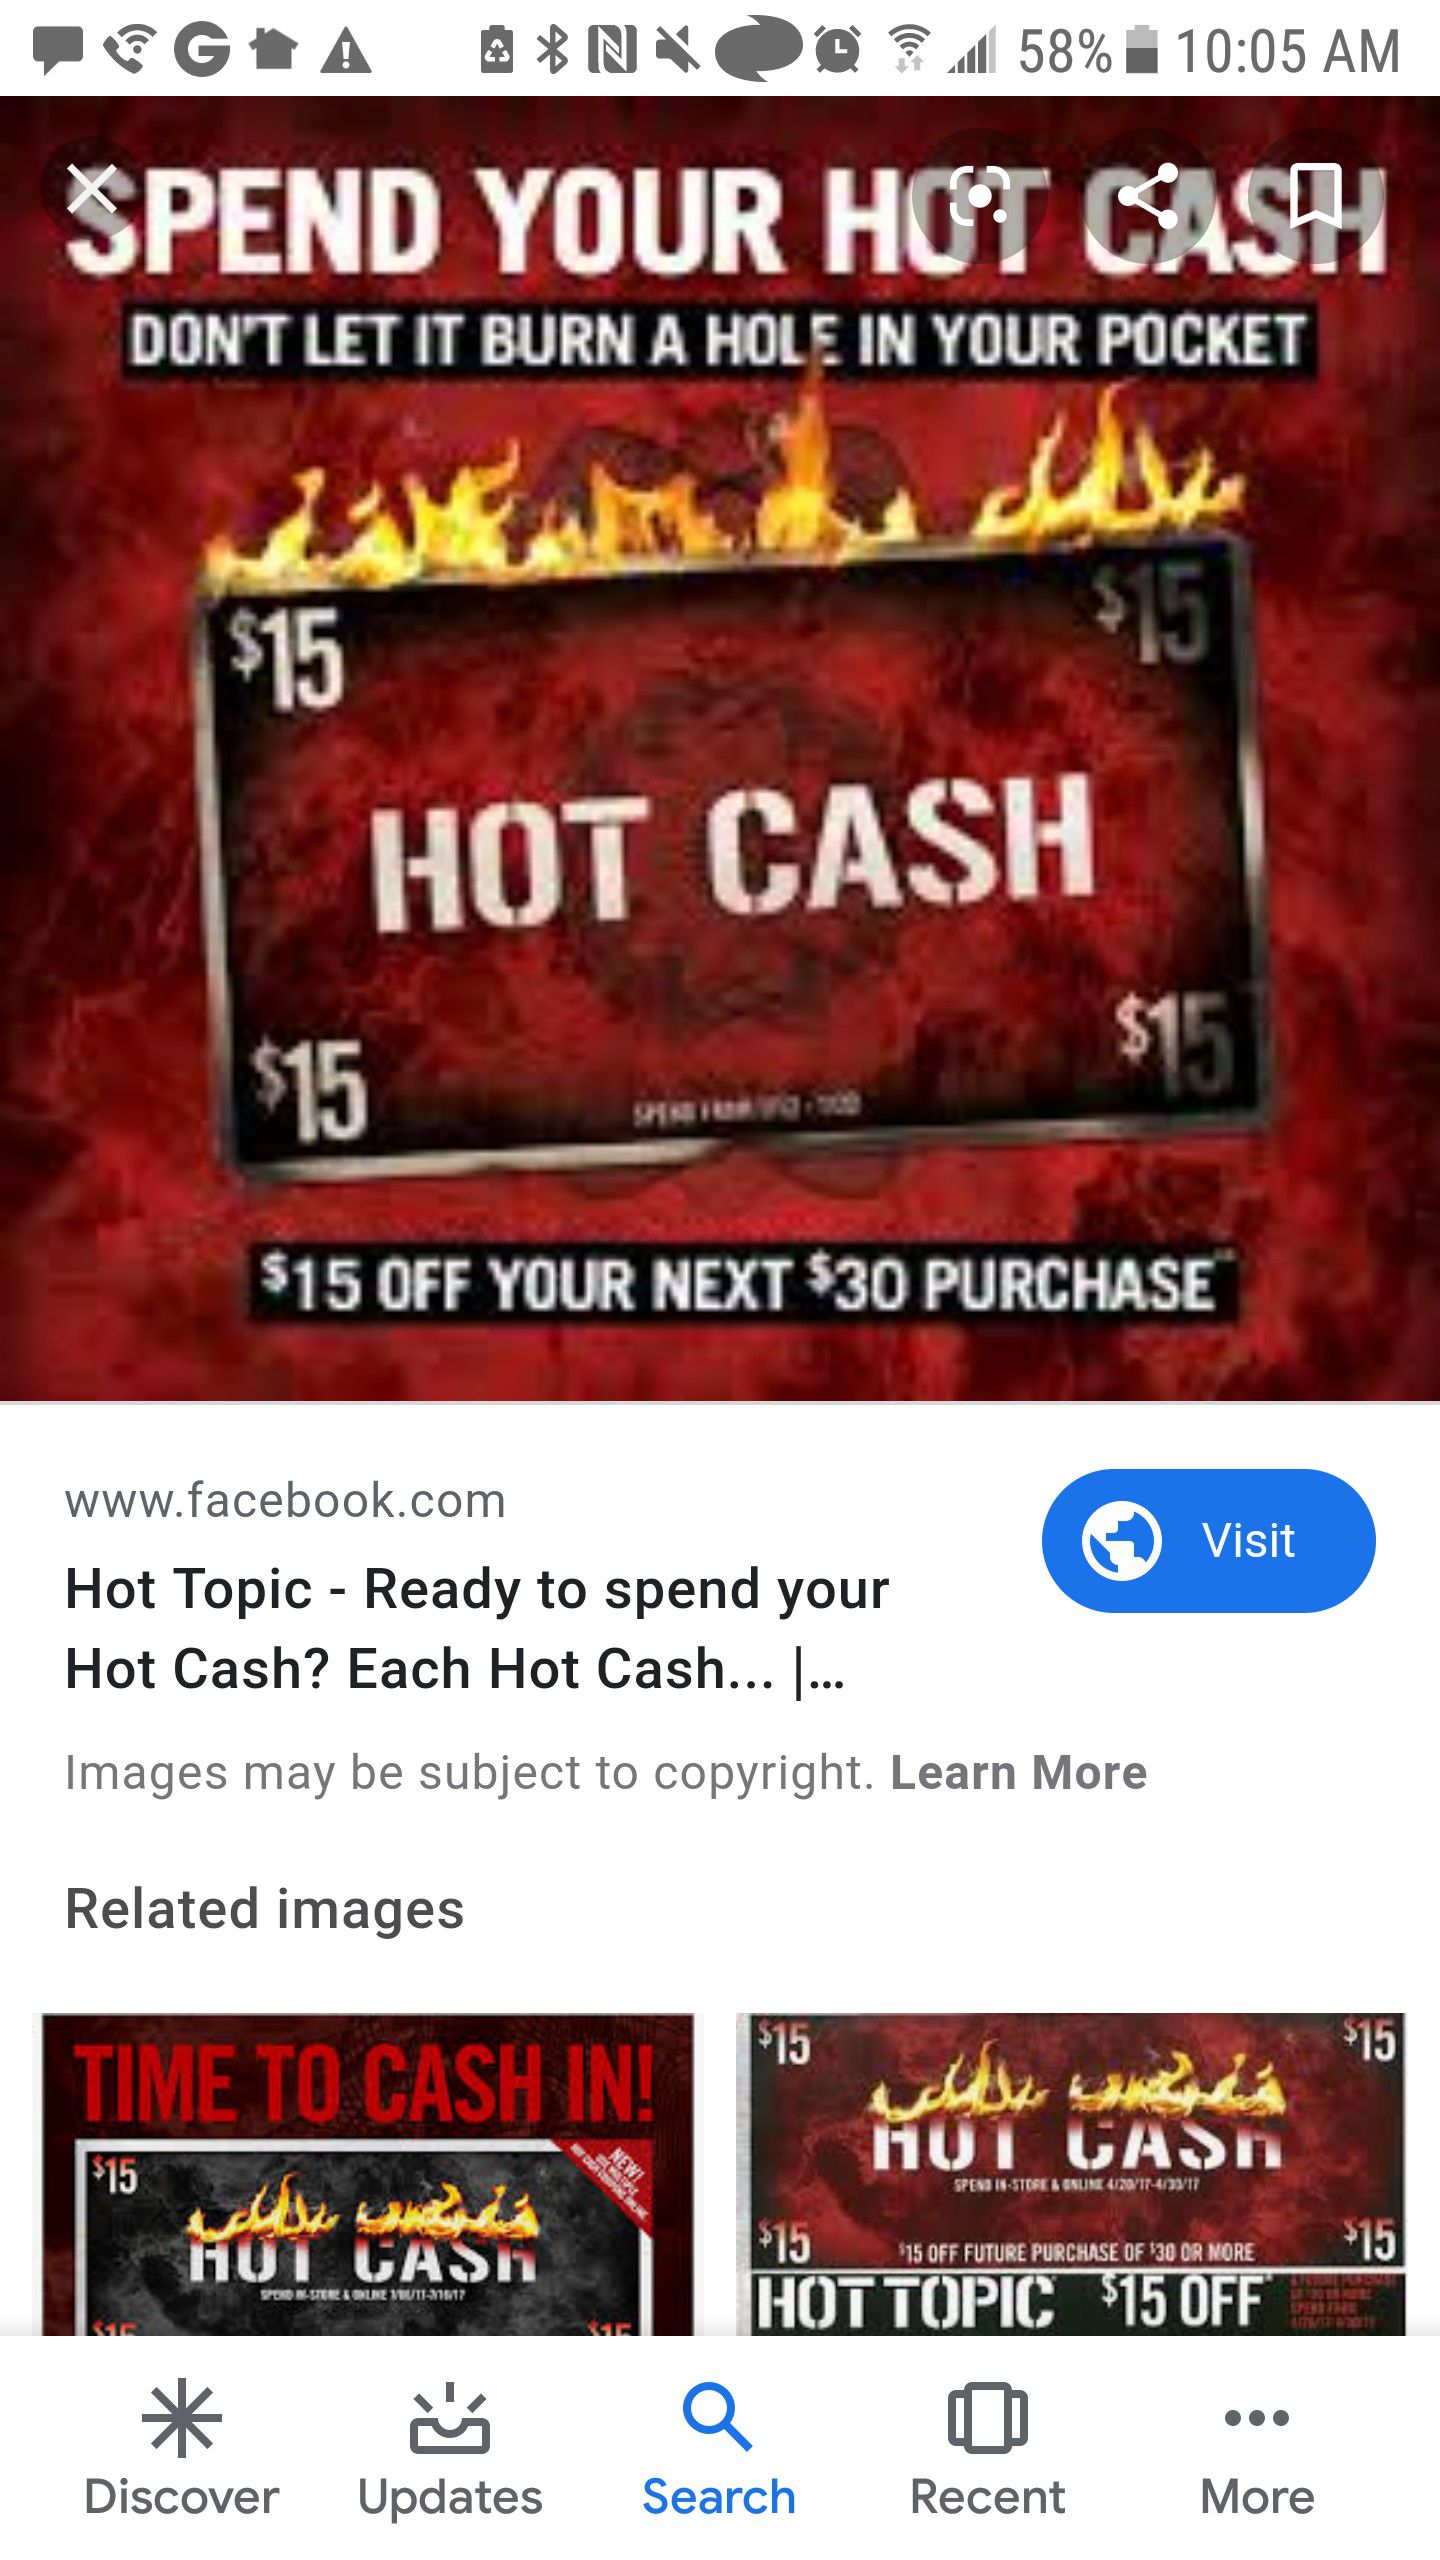 Hot topic " Hot Cash" half off coupon Free . Save $15 off $30 . Online Only.